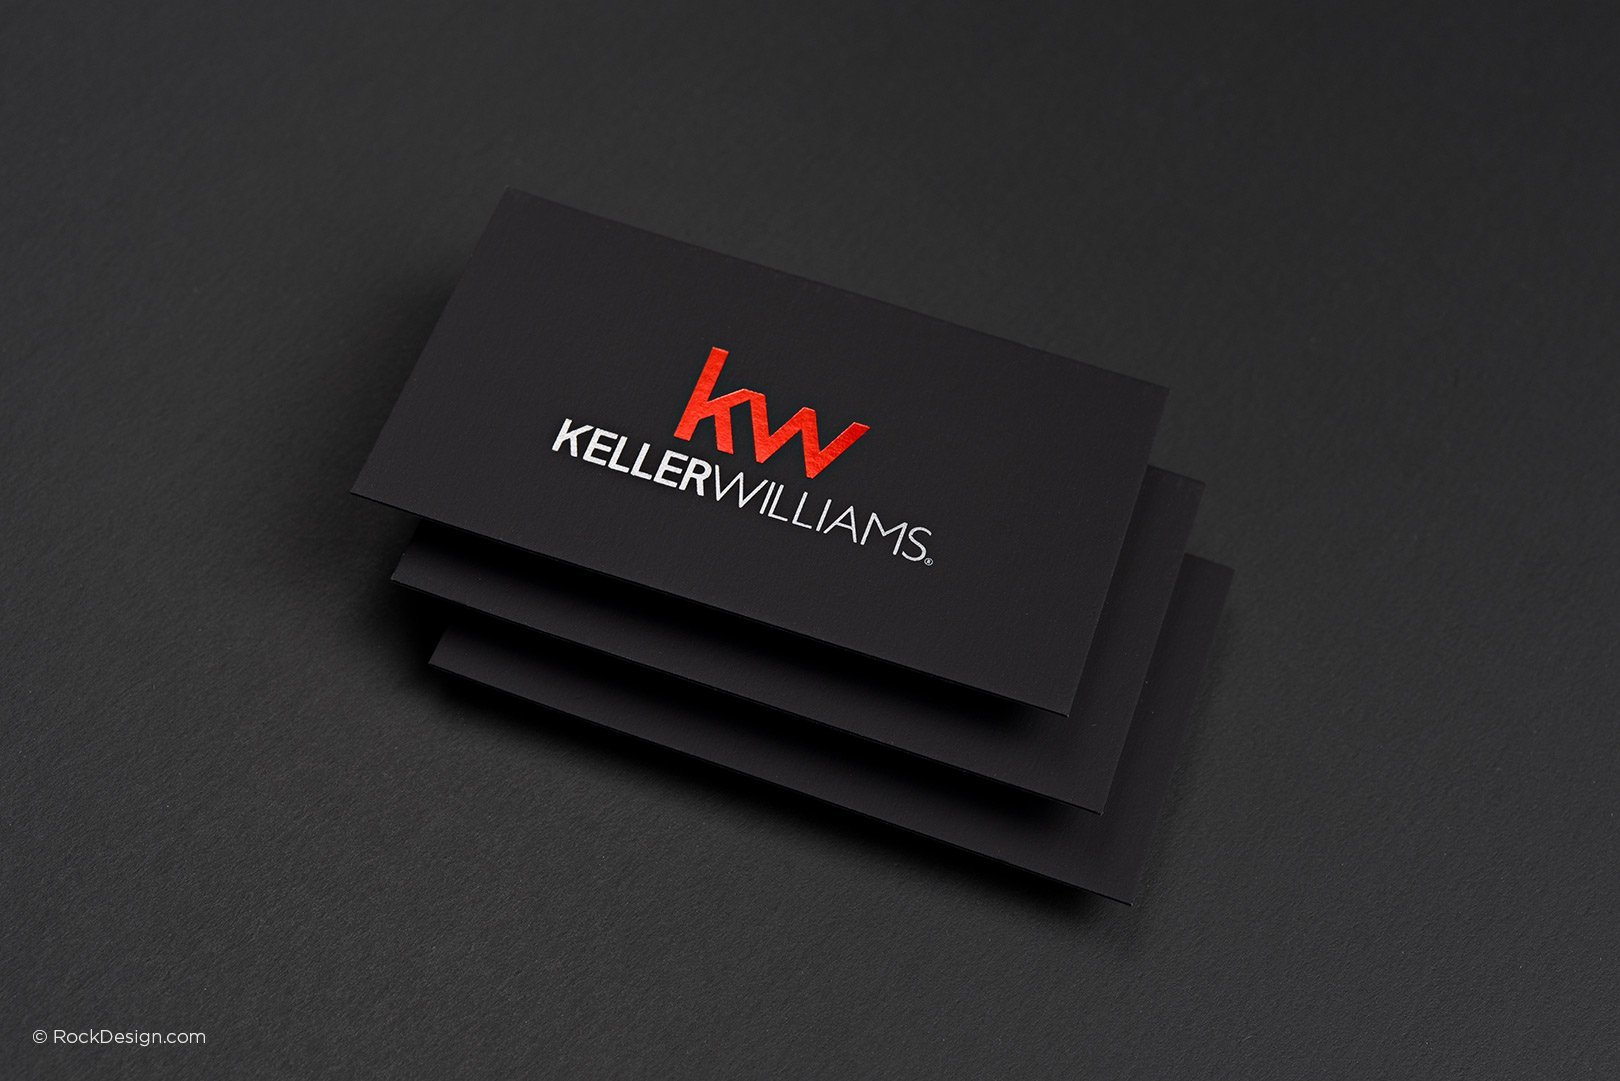 FREE Keller Williams business card template with print service Pertaining To Keller Williams Business Card Templates